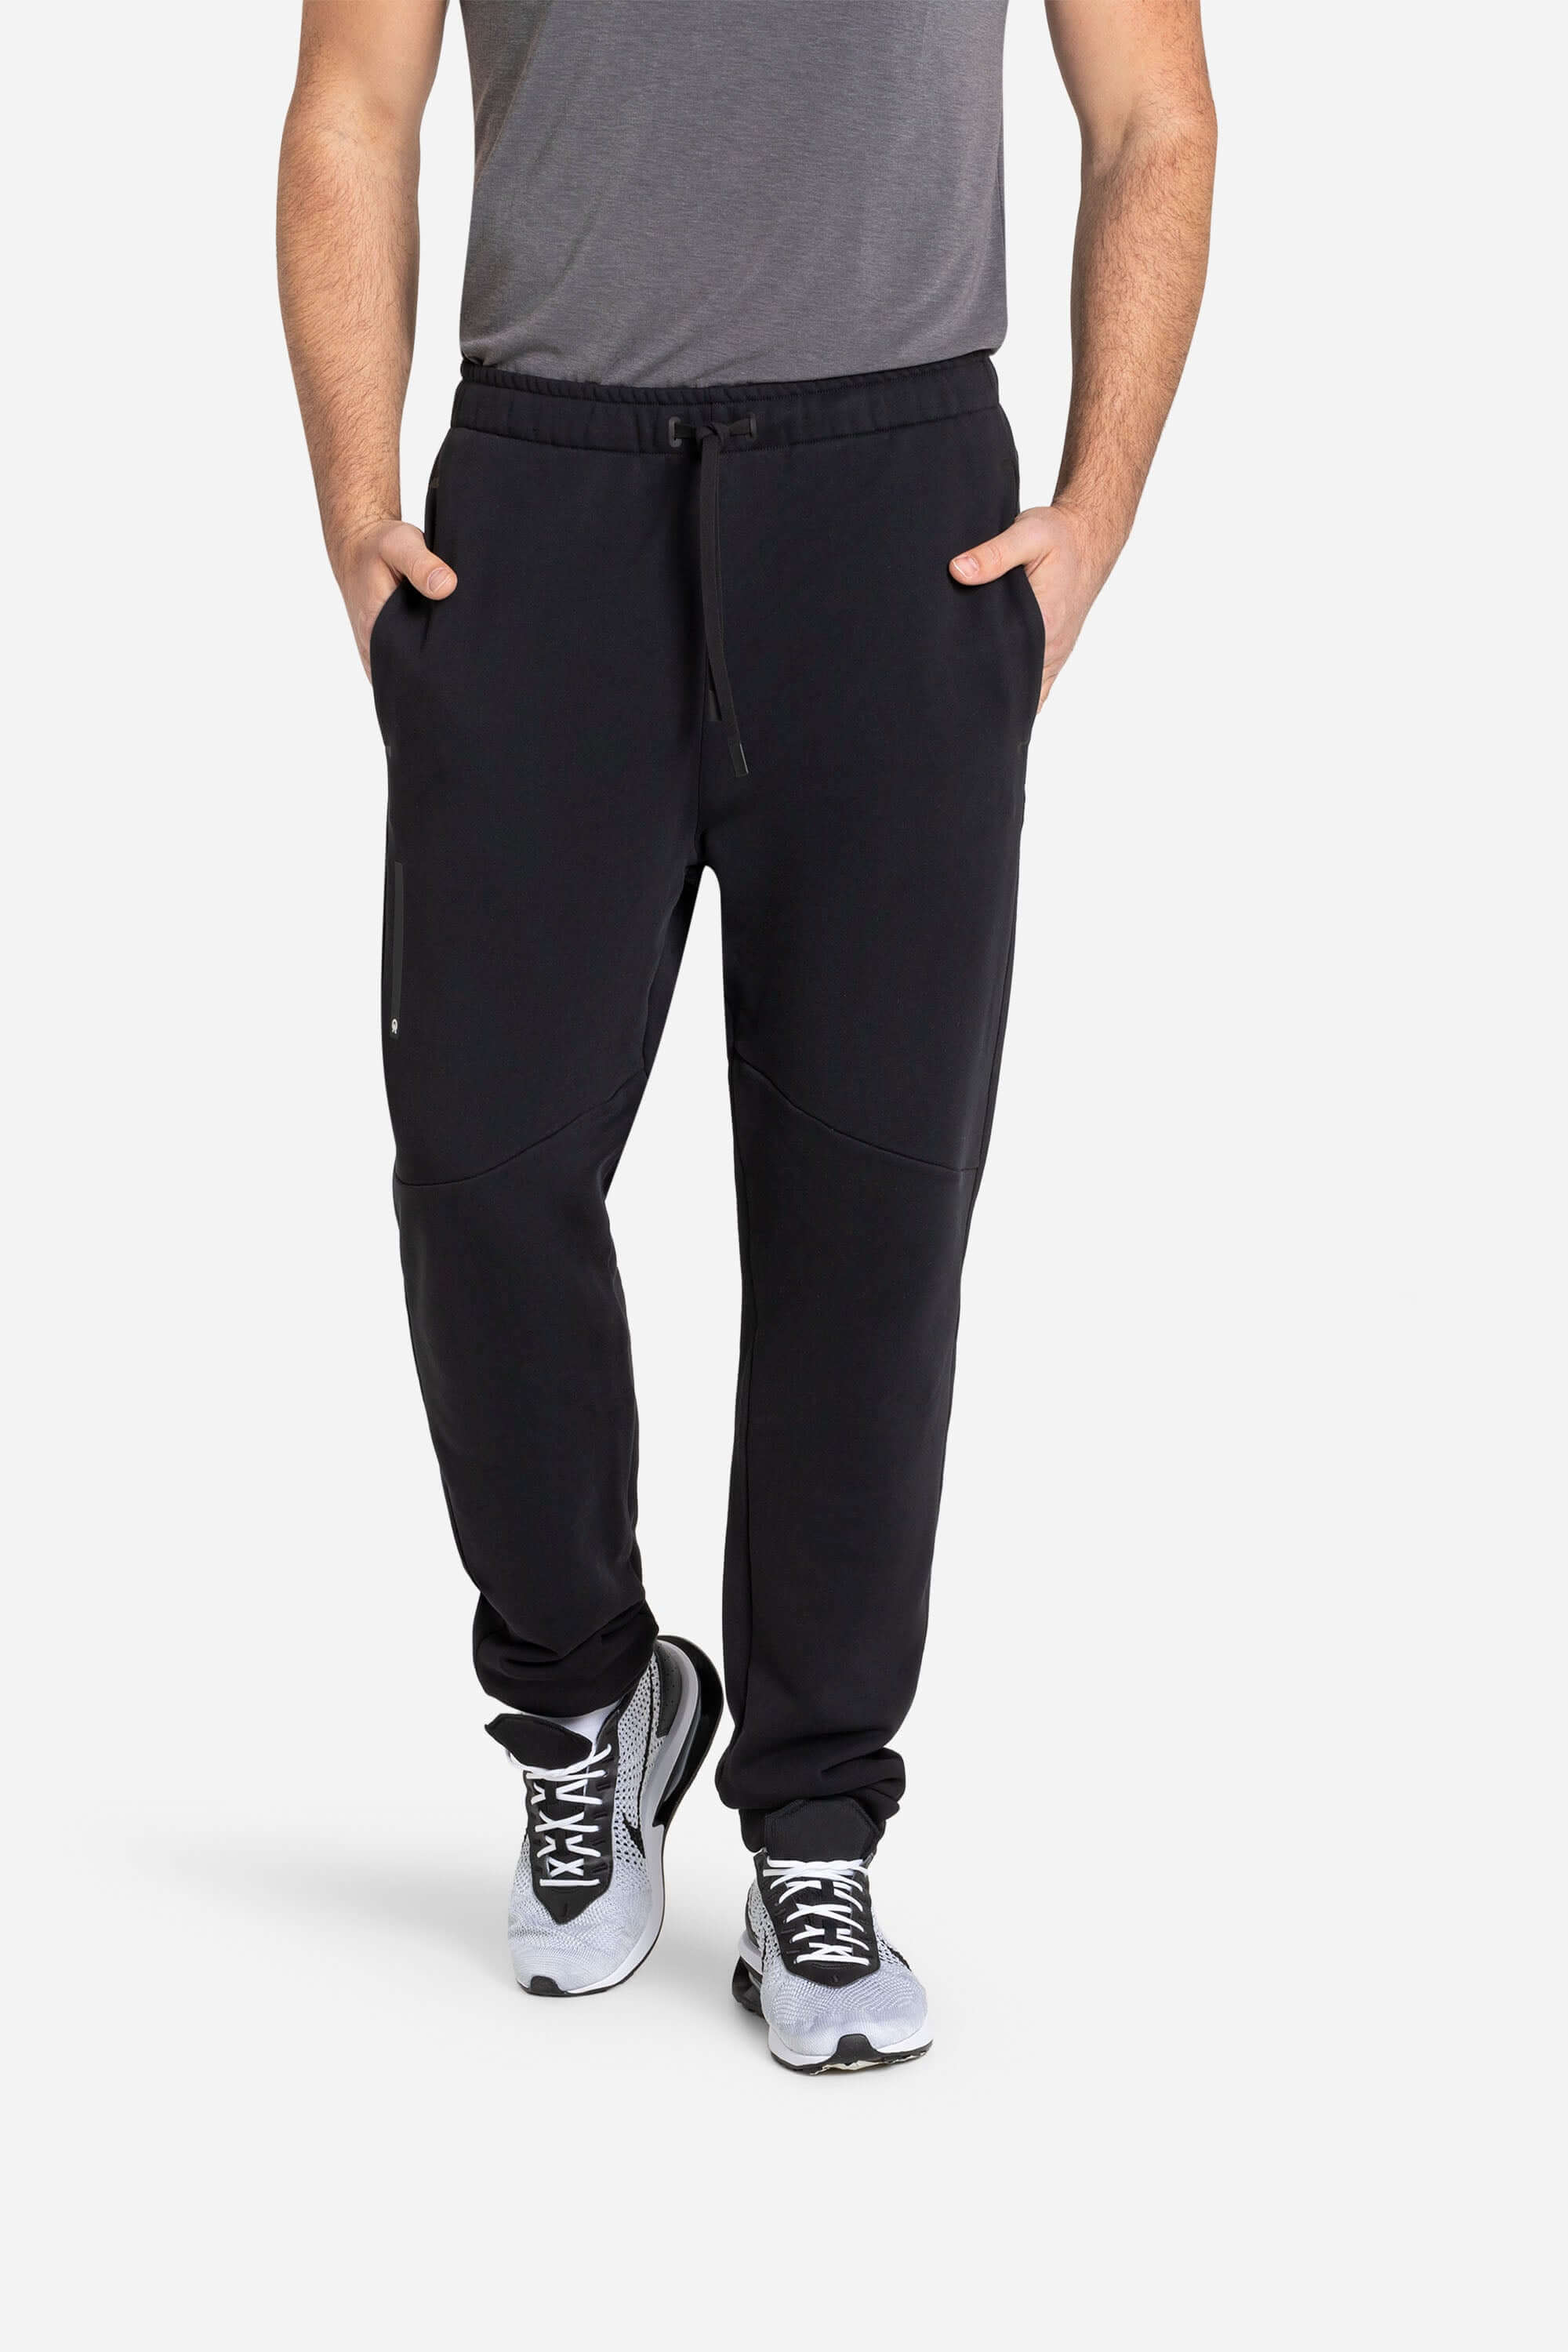 Men in black joggers for training or leisure from AYCANE